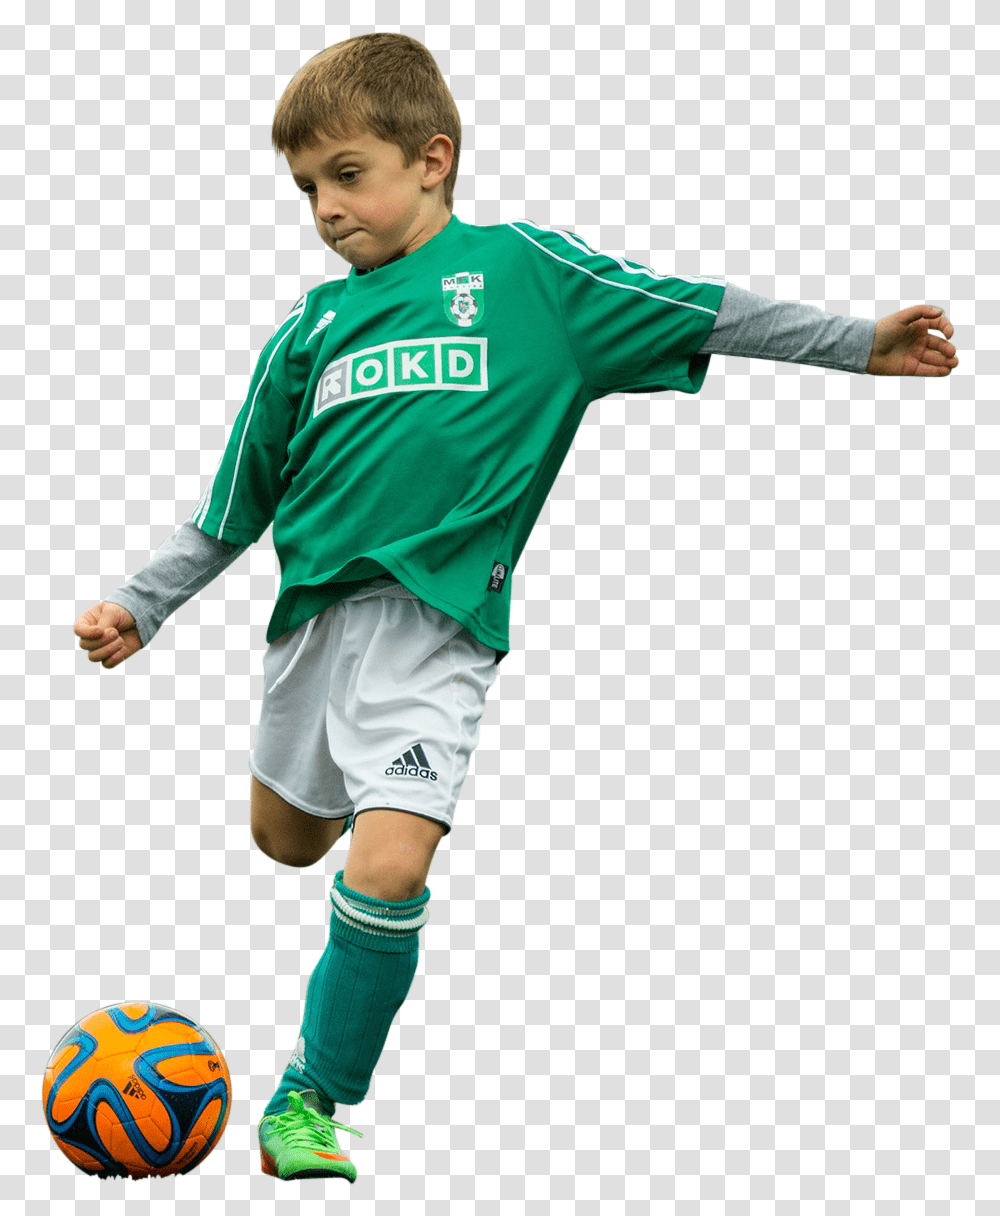 Little Boy Play With Football Image Boy Kicking Football, Person, Human, People, Sphere Transparent Png